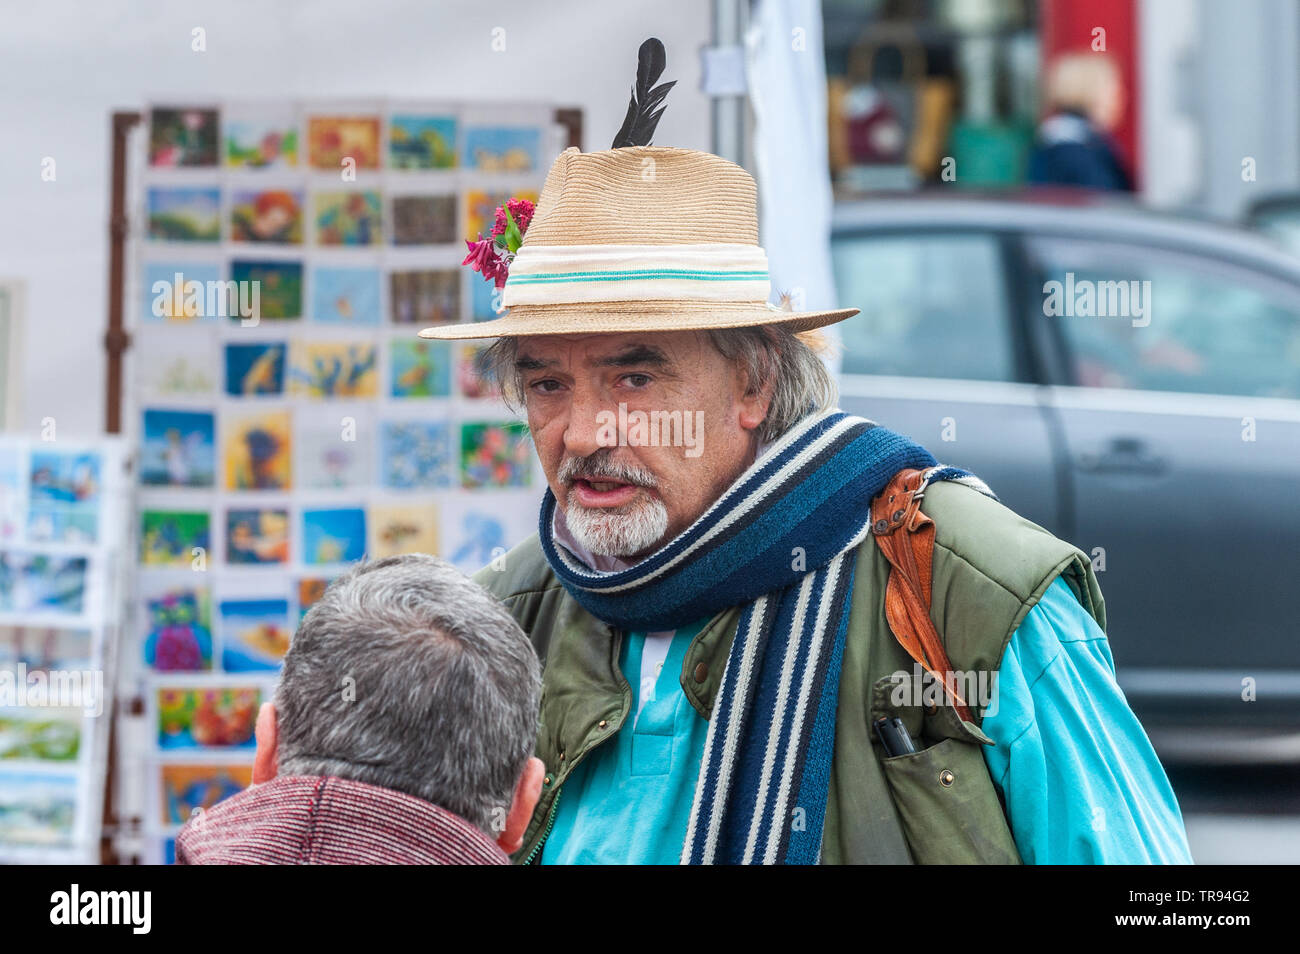 Bantry, West Cork, Ireland. 31st May, 2019. Ian Bailey, the man who is on trial in France in absentia for the murder of Sophie Toscan Du Plantier, was in Bantry Market this morning. A verdict is expected in the trial today. Credit: AG News/Alamy Live News Stock Photo